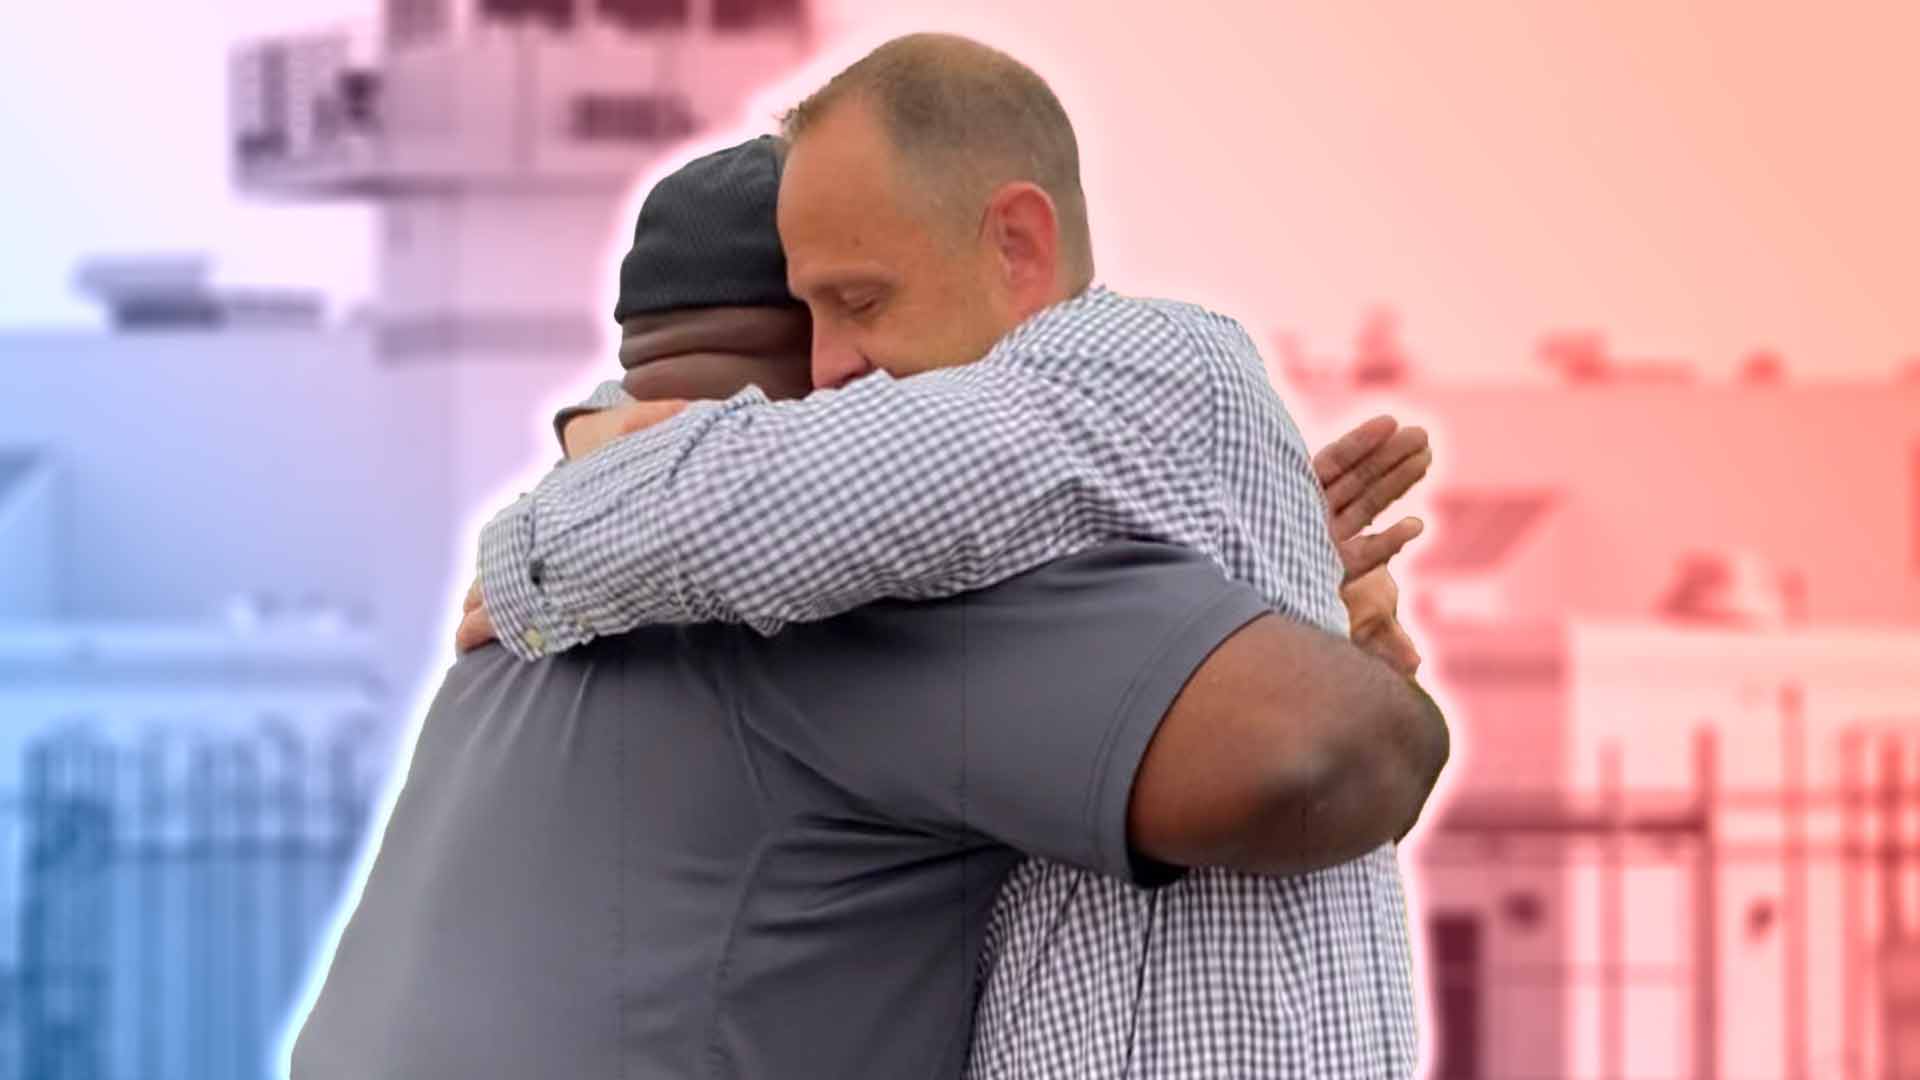 Wally's Brother Hugging Prison Guard in Front of Prison